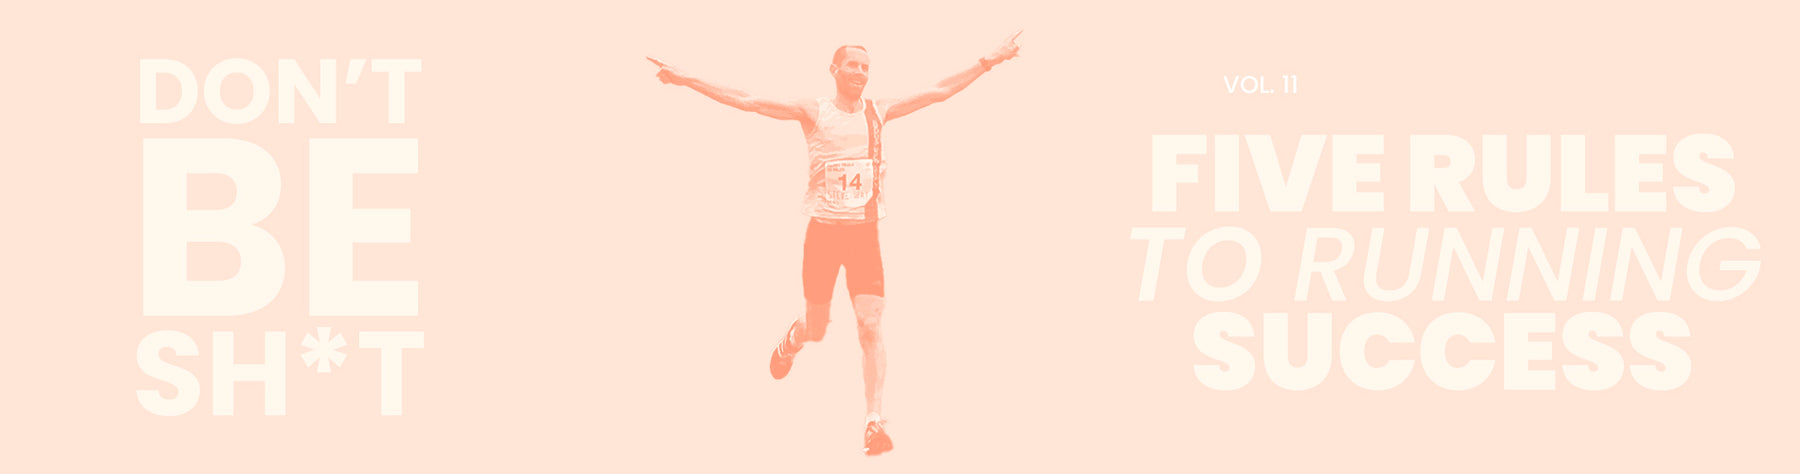 The "Don't Be Sh*t!" Series - Steve Way’s five rules to running success